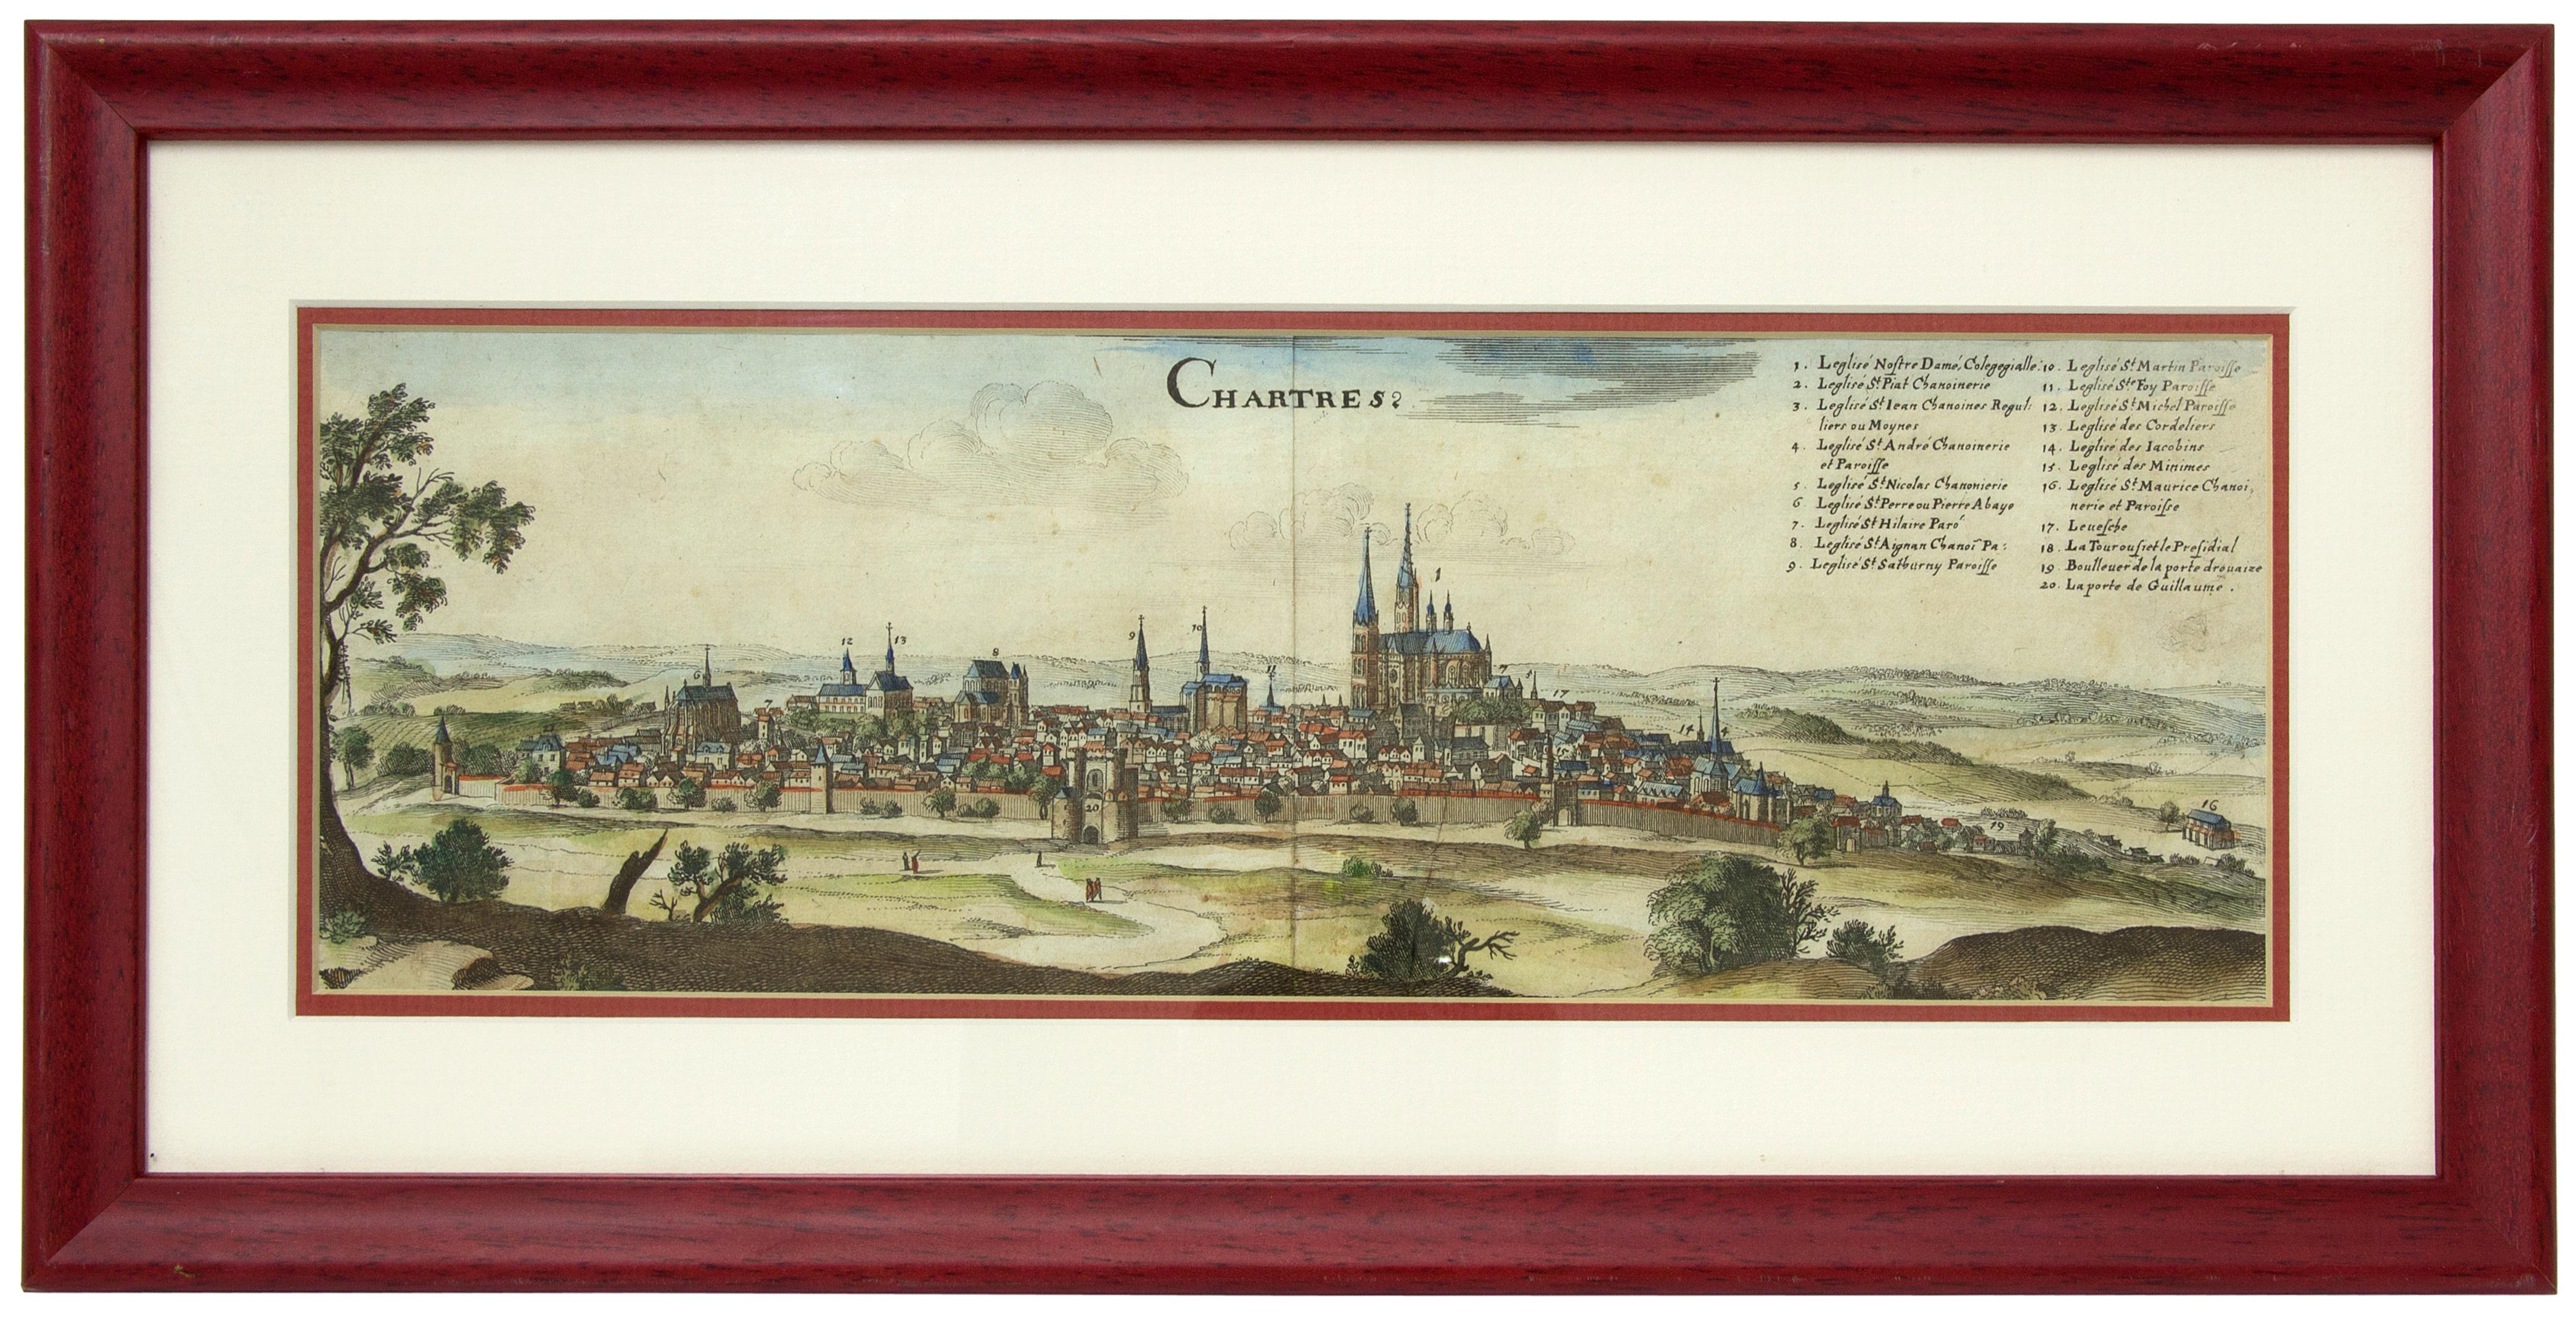 Unknown Landscape Print - View of Chartres, France